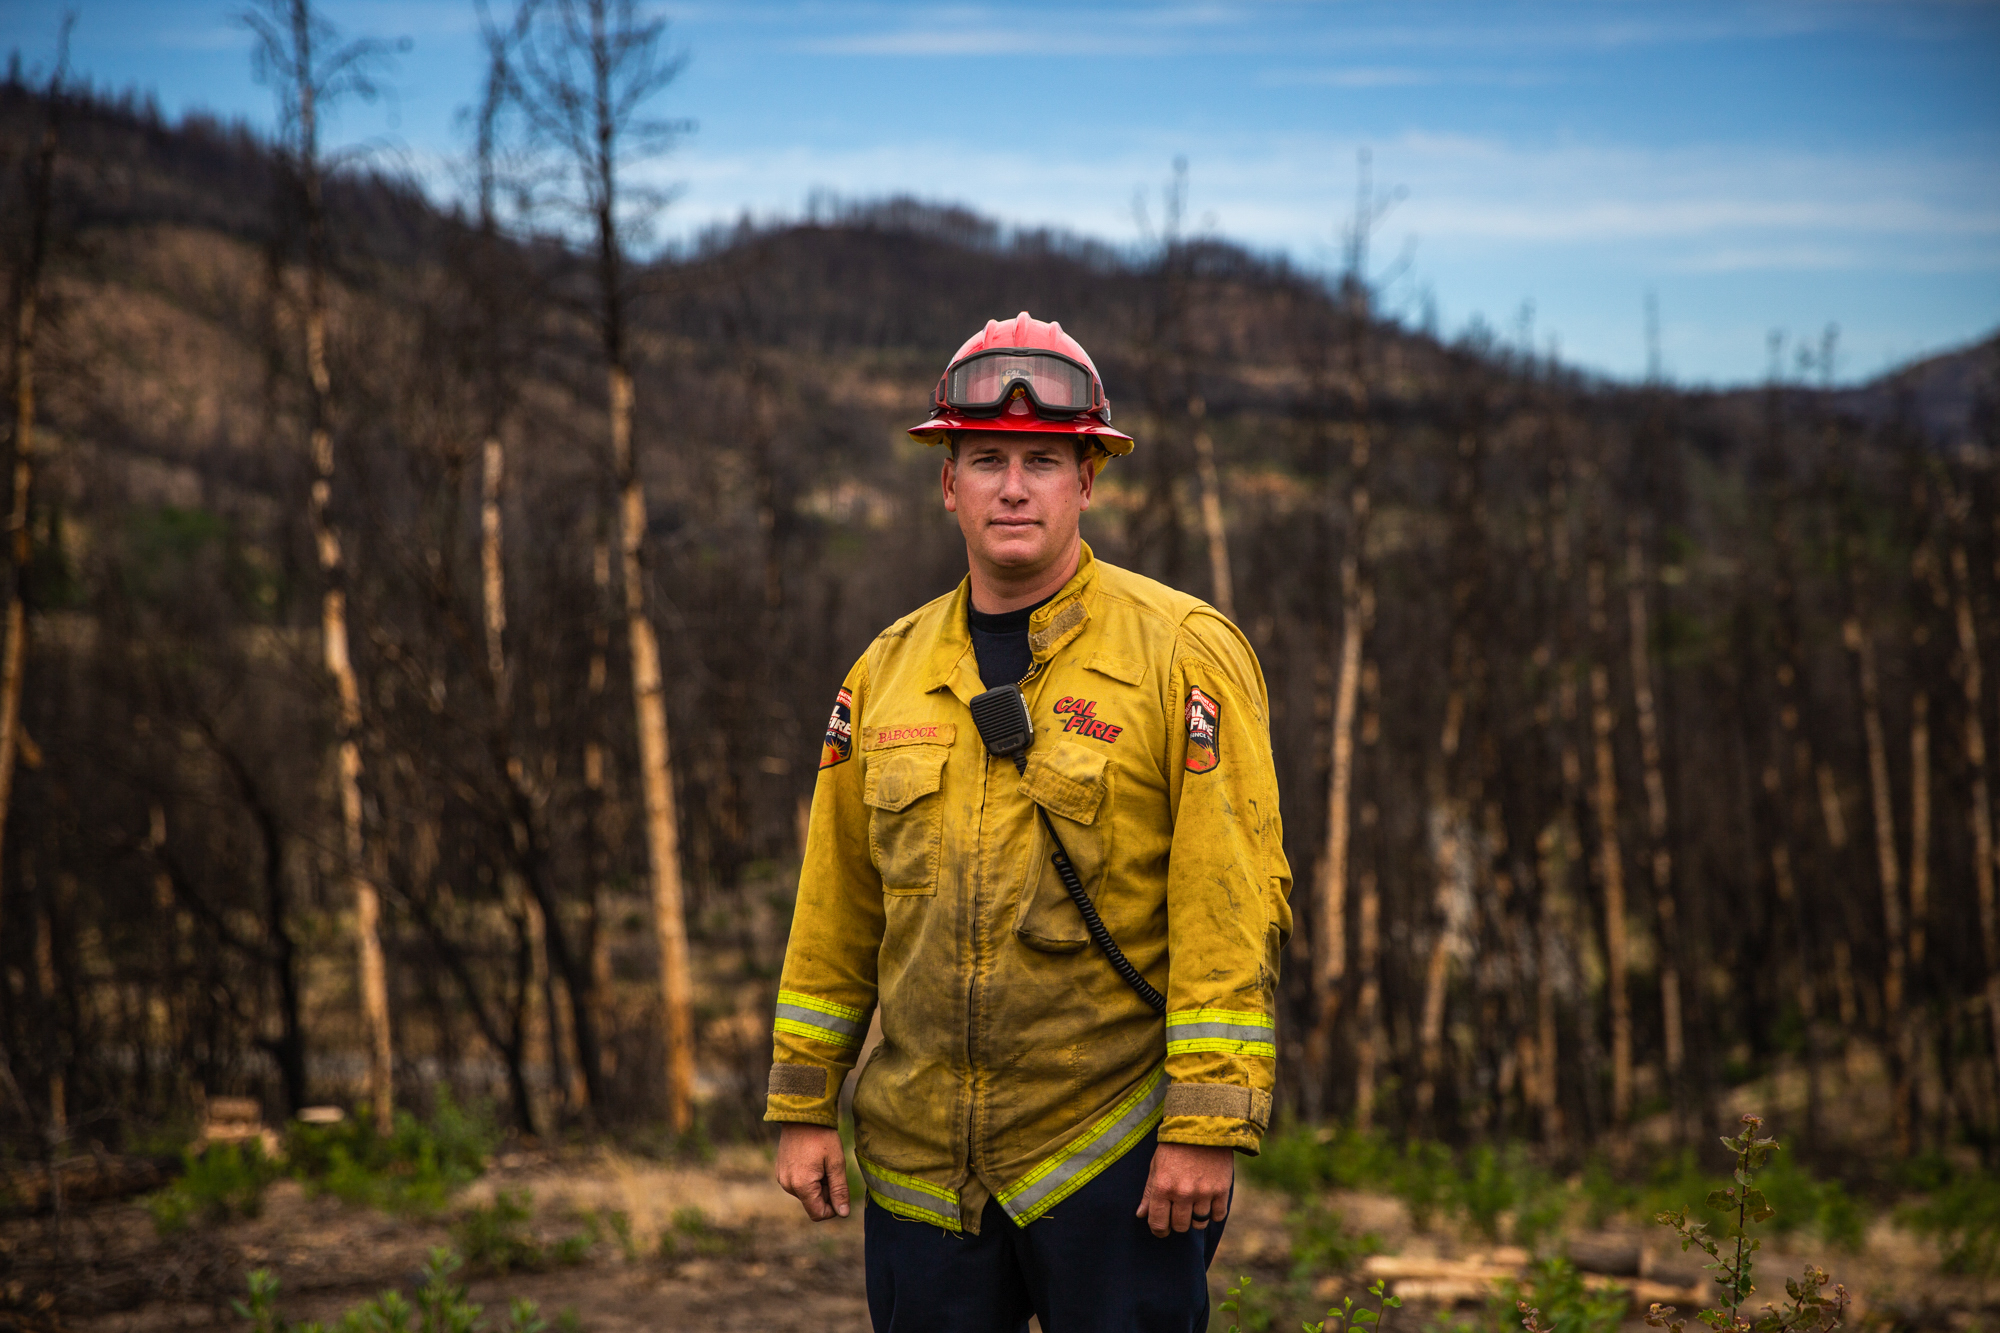 Greg Babcock - Capt. Greg Babcock leads 26 members of Cal Fire and the California National Guard as they clear areas that burned in the 2018 Carr Fire near Redding, California, hoping to eliminate potential fuel for a future fire. “As years progress, (fire) seasons have been getting longer,” he said. “It seems lately in the last few years, fires have been more devastating.” (Anton L. Delgado/News21)